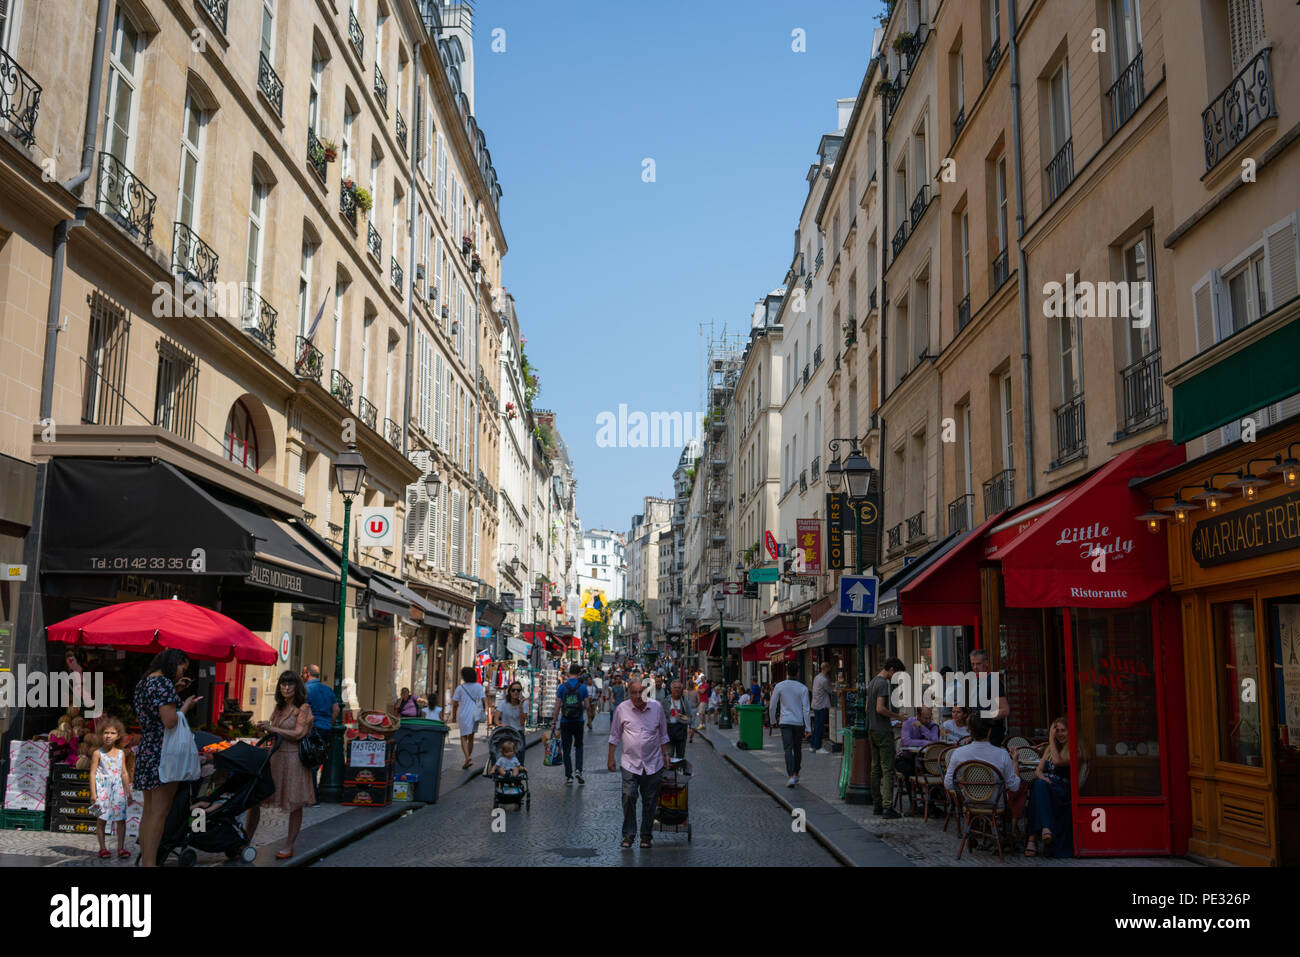 Paris France, 14 July 2018: Rue Montorgueil pedestrian street view in Paris France during summer with tourists and parisian people Stock Photo